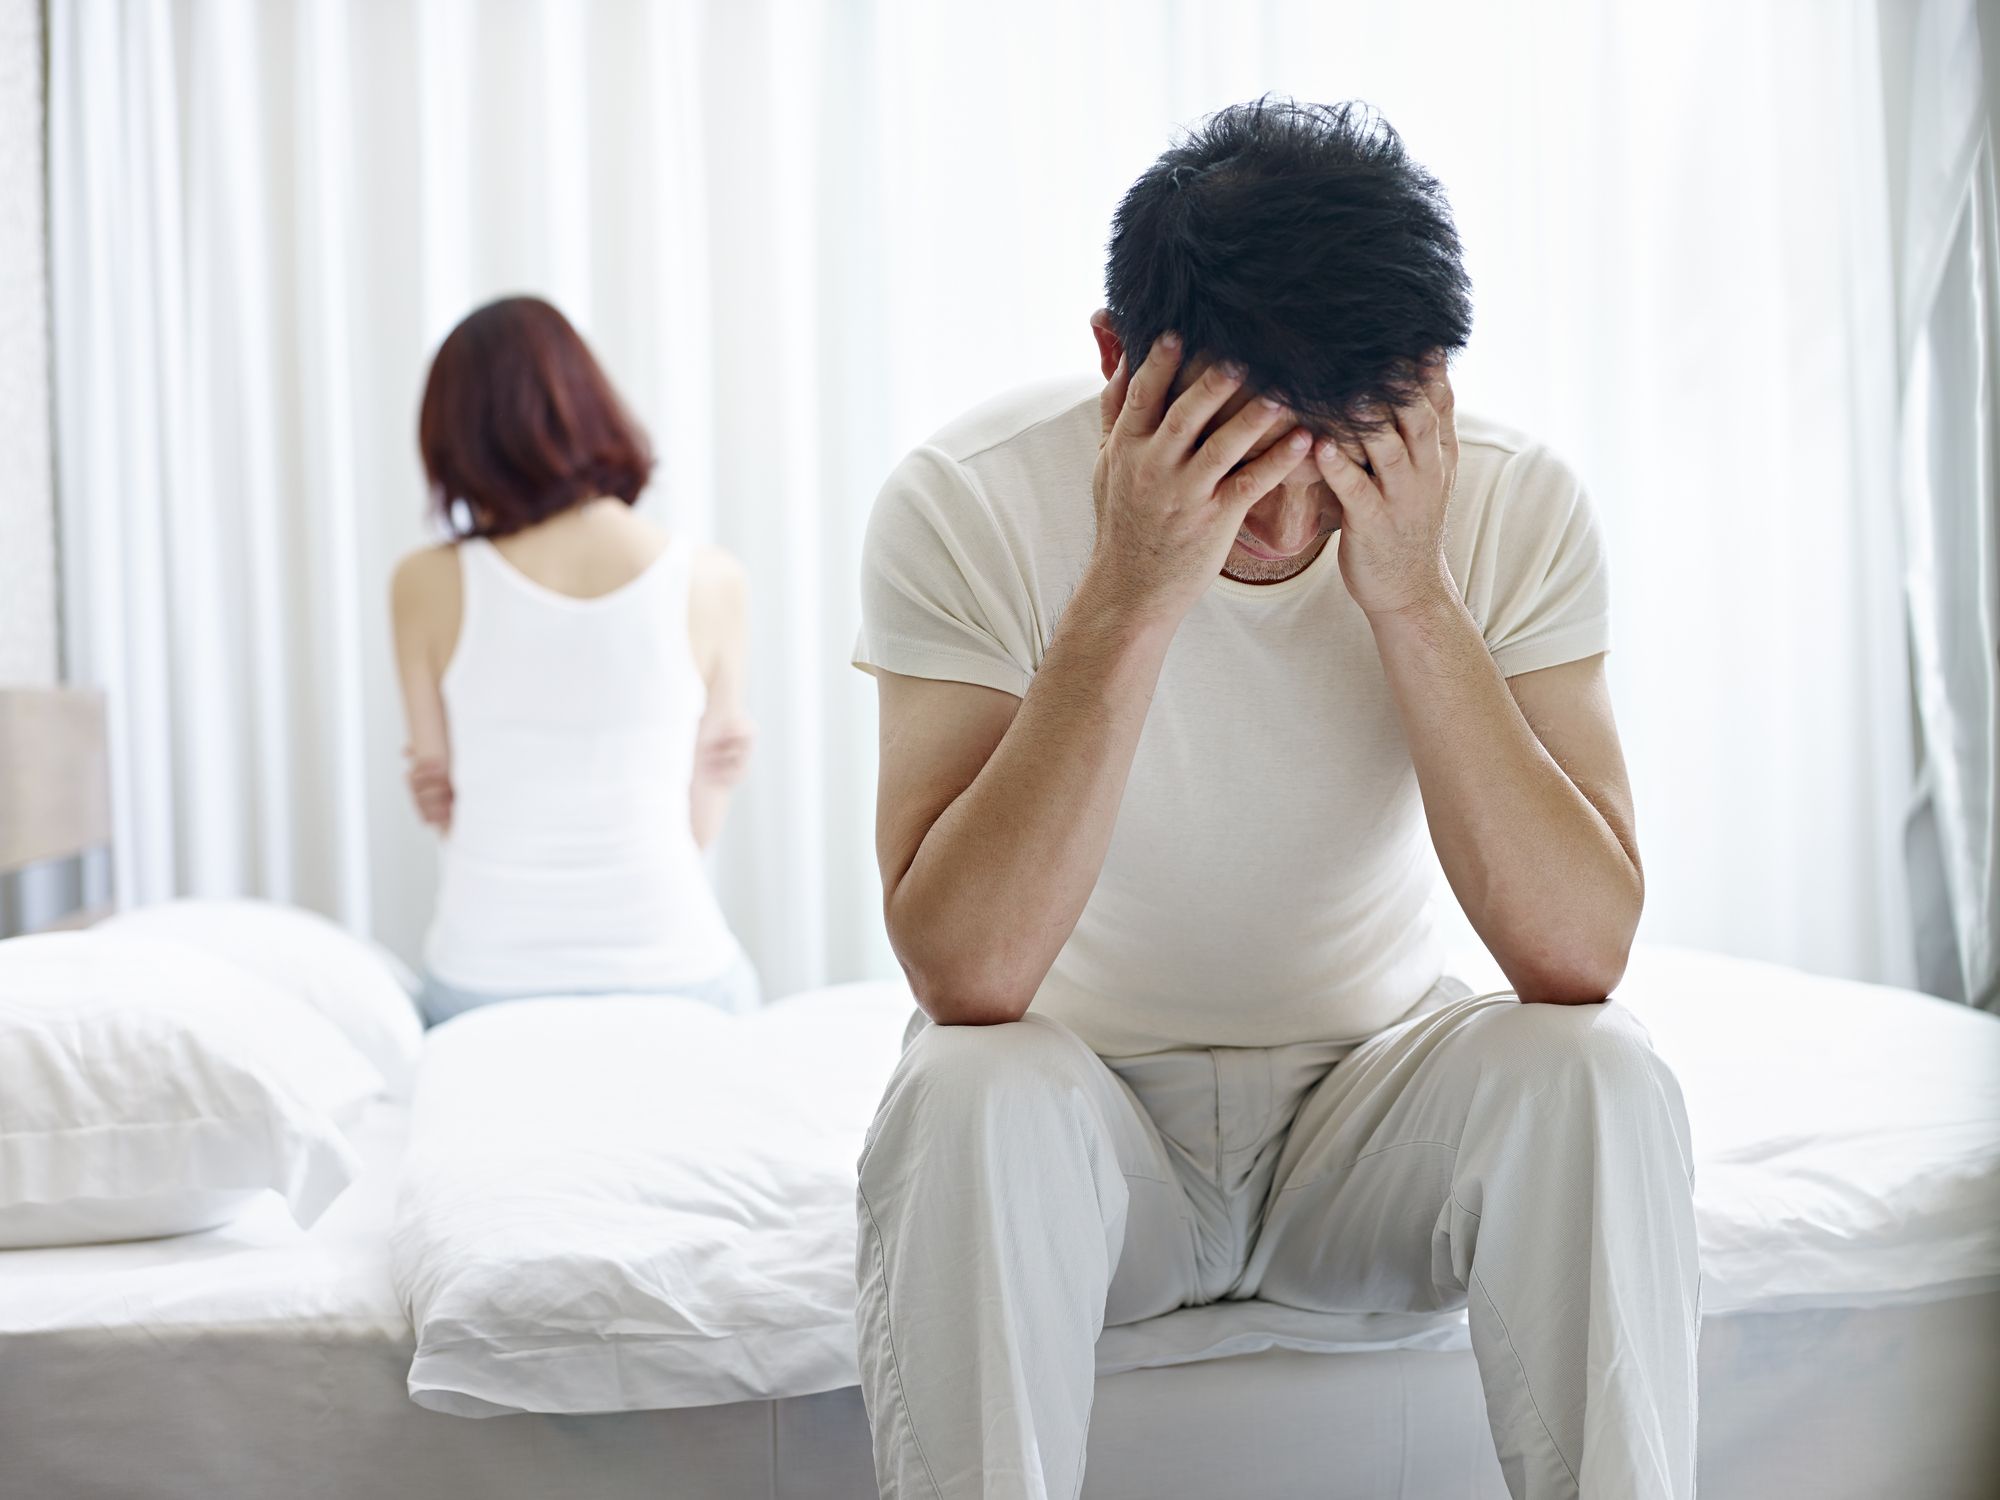 What Causes Erectile Dysfunction? Your Genetics Could Play a Role.